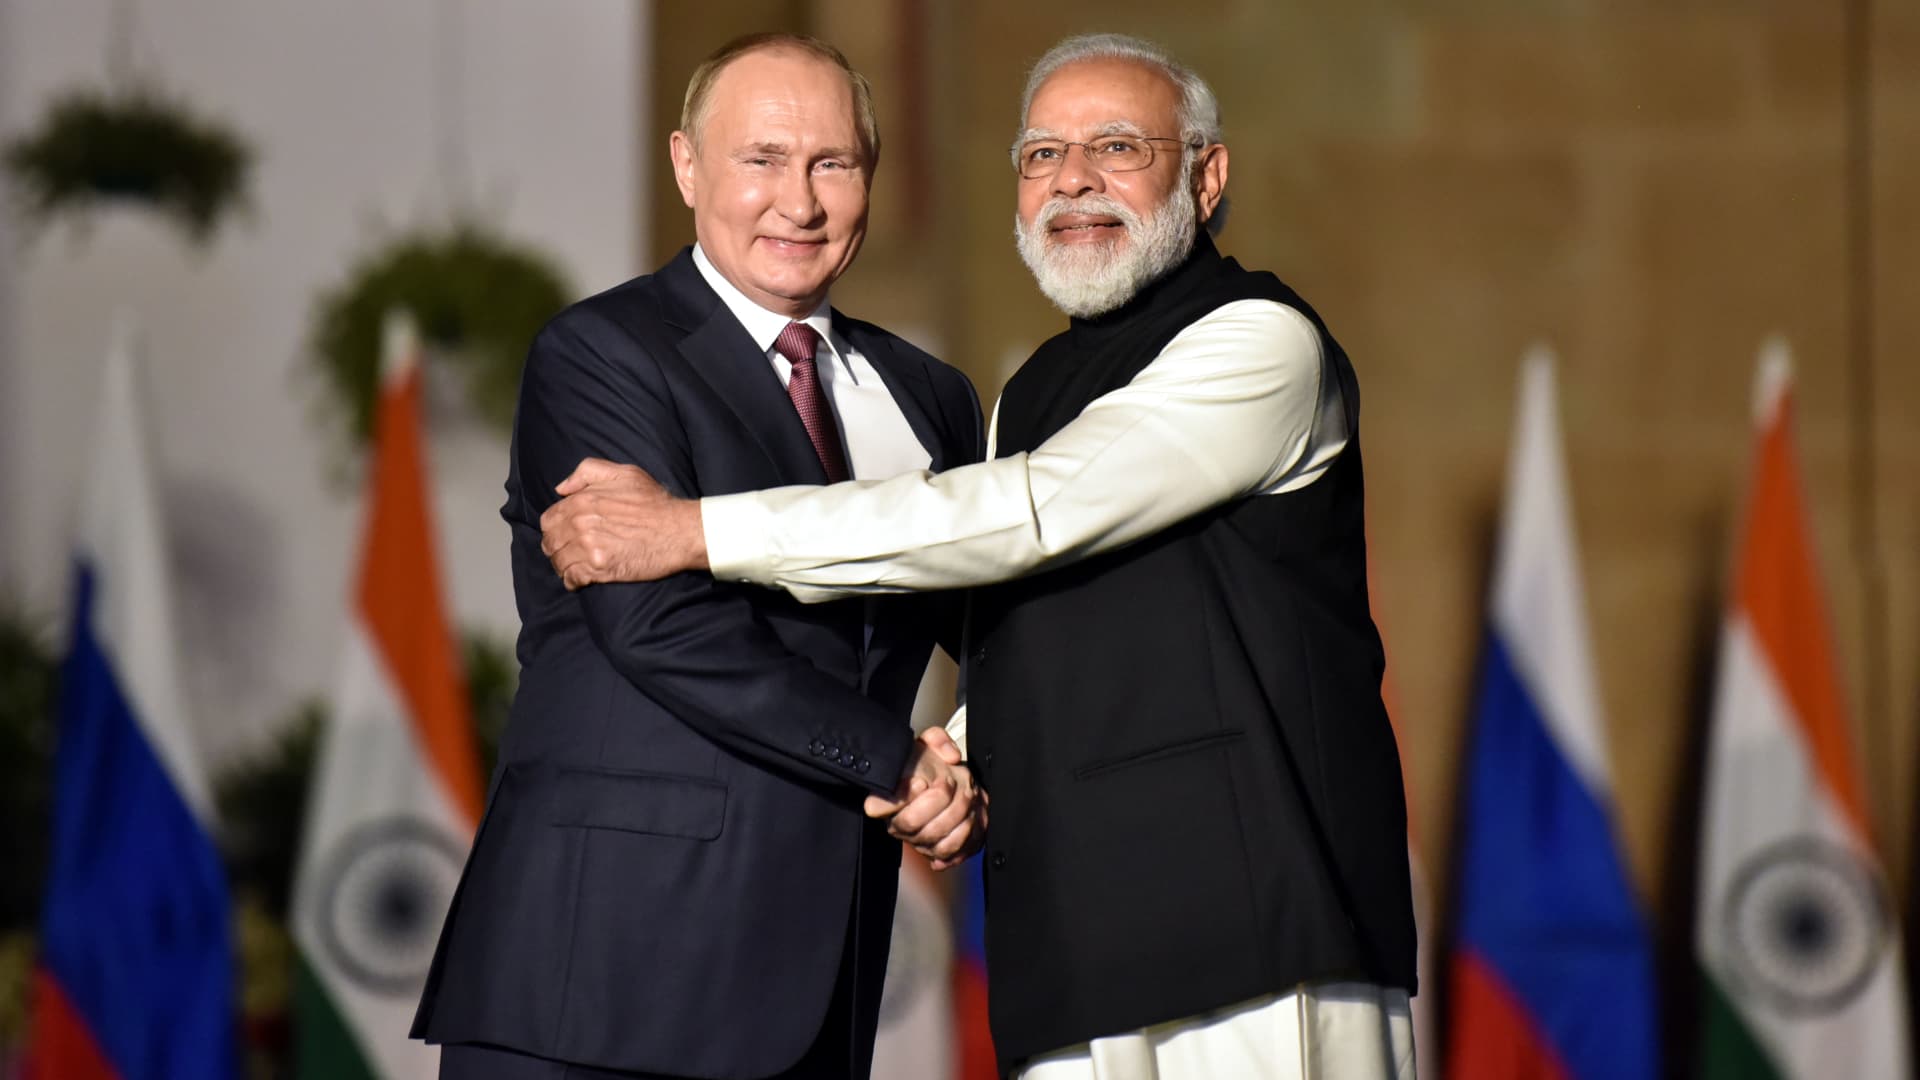 Indian Prime Minister Narendra Modi shakes hands with Russian President Vladimir Putin during their meeting at Hyderabad House, on December 6, 2021 in New Delhi, India.